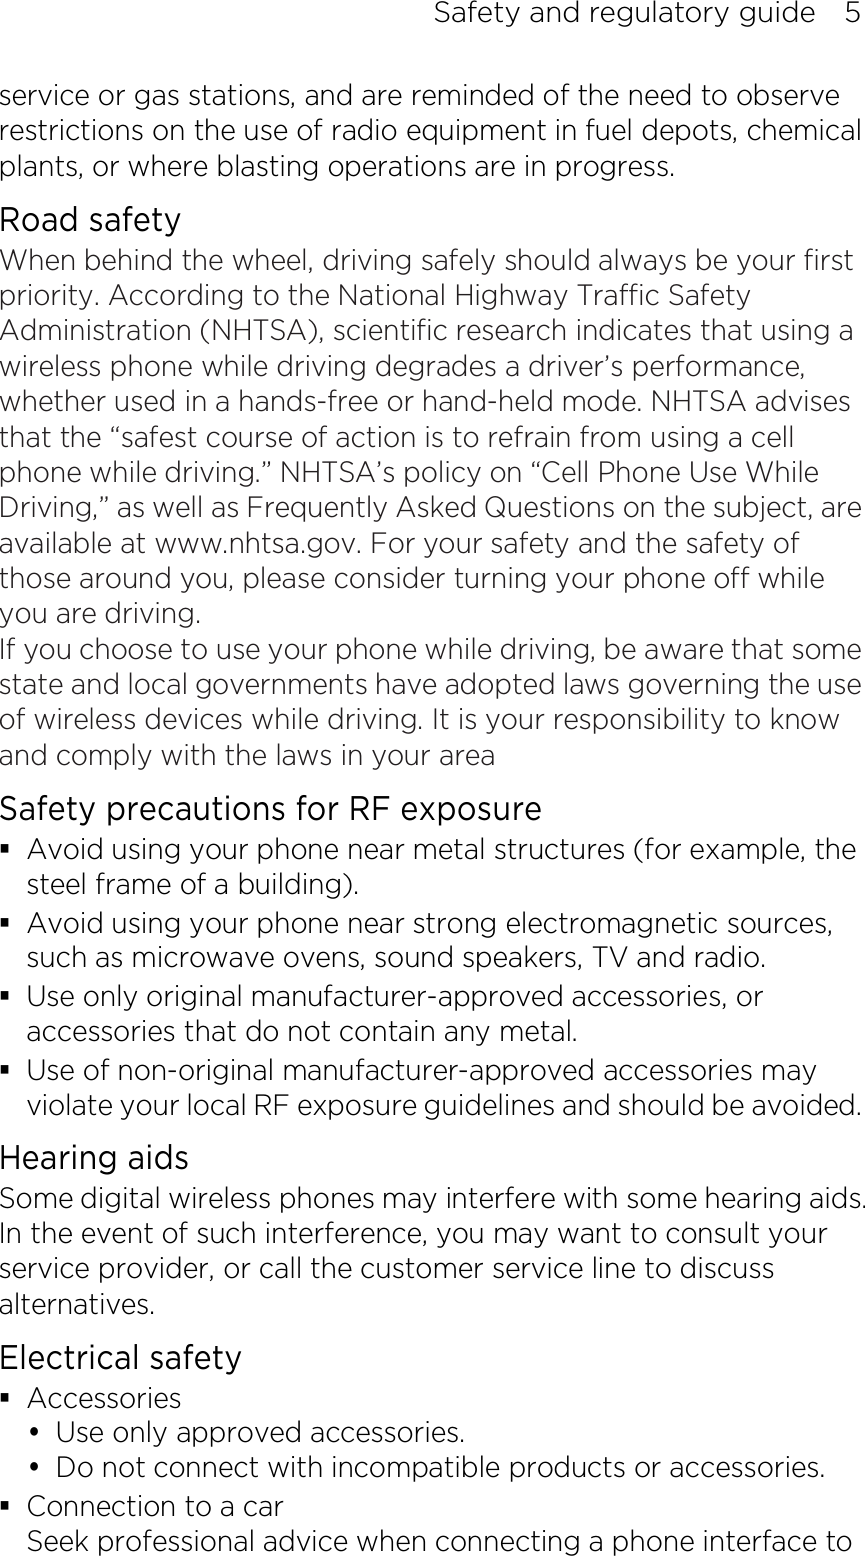 Safety and regulatory guide    5 service or gas stations, and are reminded of the need to observe restrictions on the use of radio equipment in fuel depots, chemical plants, or where blasting operations are in progress.   Road safety When behind the wheel, driving safely should always be your first priority. According to the National Highway Traffic Safety Administration (NHTSA), scientific research indicates that using a wireless phone while driving degrades a driver’s performance, whether used in a hands-free or hand-held mode. NHTSA advises that the “safest course of action is to refrain from using a cell phone while driving.” NHTSA’s policy on “Cell Phone Use While Driving,” as well as Frequently Asked Questions on the subject, are available at www.nhtsa.gov. For your safety and the safety of those around you, please consider turning your phone off while you are driving.   If you choose to use your phone while driving, be aware that some state and local governments have adopted laws governing the use of wireless devices while driving. It is your responsibility to know and comply with the laws in your area Safety precautions for RF exposure  Avoid using your phone near metal structures (for example, the steel frame of a building).  Avoid using your phone near strong electromagnetic sources, such as microwave ovens, sound speakers, TV and radio.  Use only original manufacturer-approved accessories, or accessories that do not contain any metal.  Use of non-original manufacturer-approved accessories may violate your local RF exposure guidelines and should be avoided. Hearing aids Some digital wireless phones may interfere with some hearing aids. In the event of such interference, you may want to consult your service provider, or call the customer service line to discuss alternatives. Electrical safety  Accessories  Use only approved accessories.  Do not connect with incompatible products or accessories.  Connection to a car Seek professional advice when connecting a phone interface to 